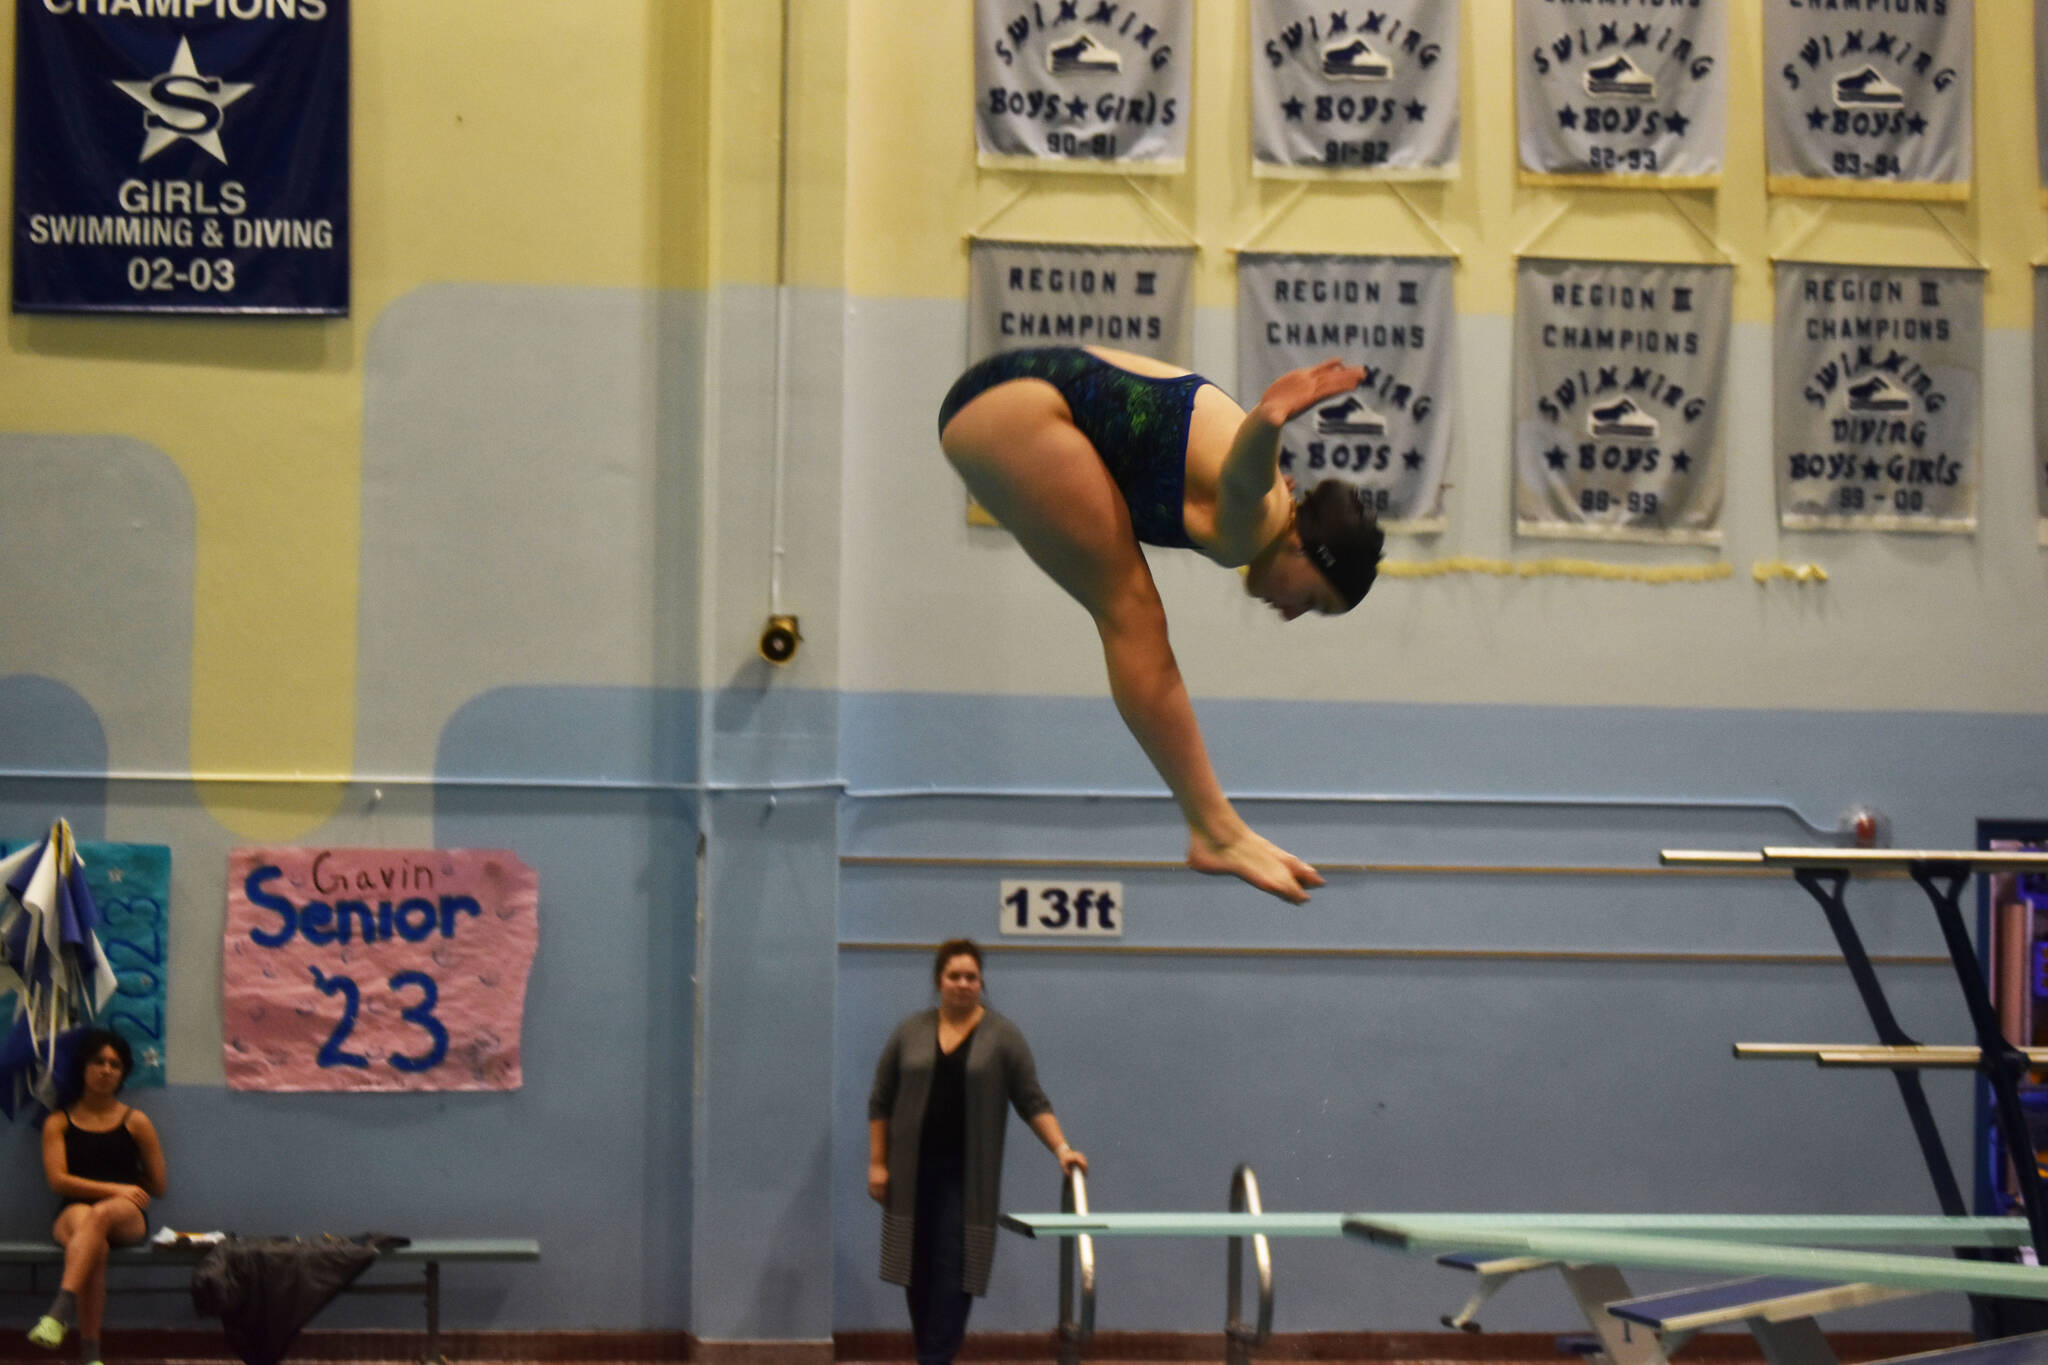 Abriella Werner performs a reverse dive during a practice on Tuesday, Oct. 11, 2022 at Soldotna High School in Soldotna, Alaska. (Jake Dye/Peninsula Clarion)